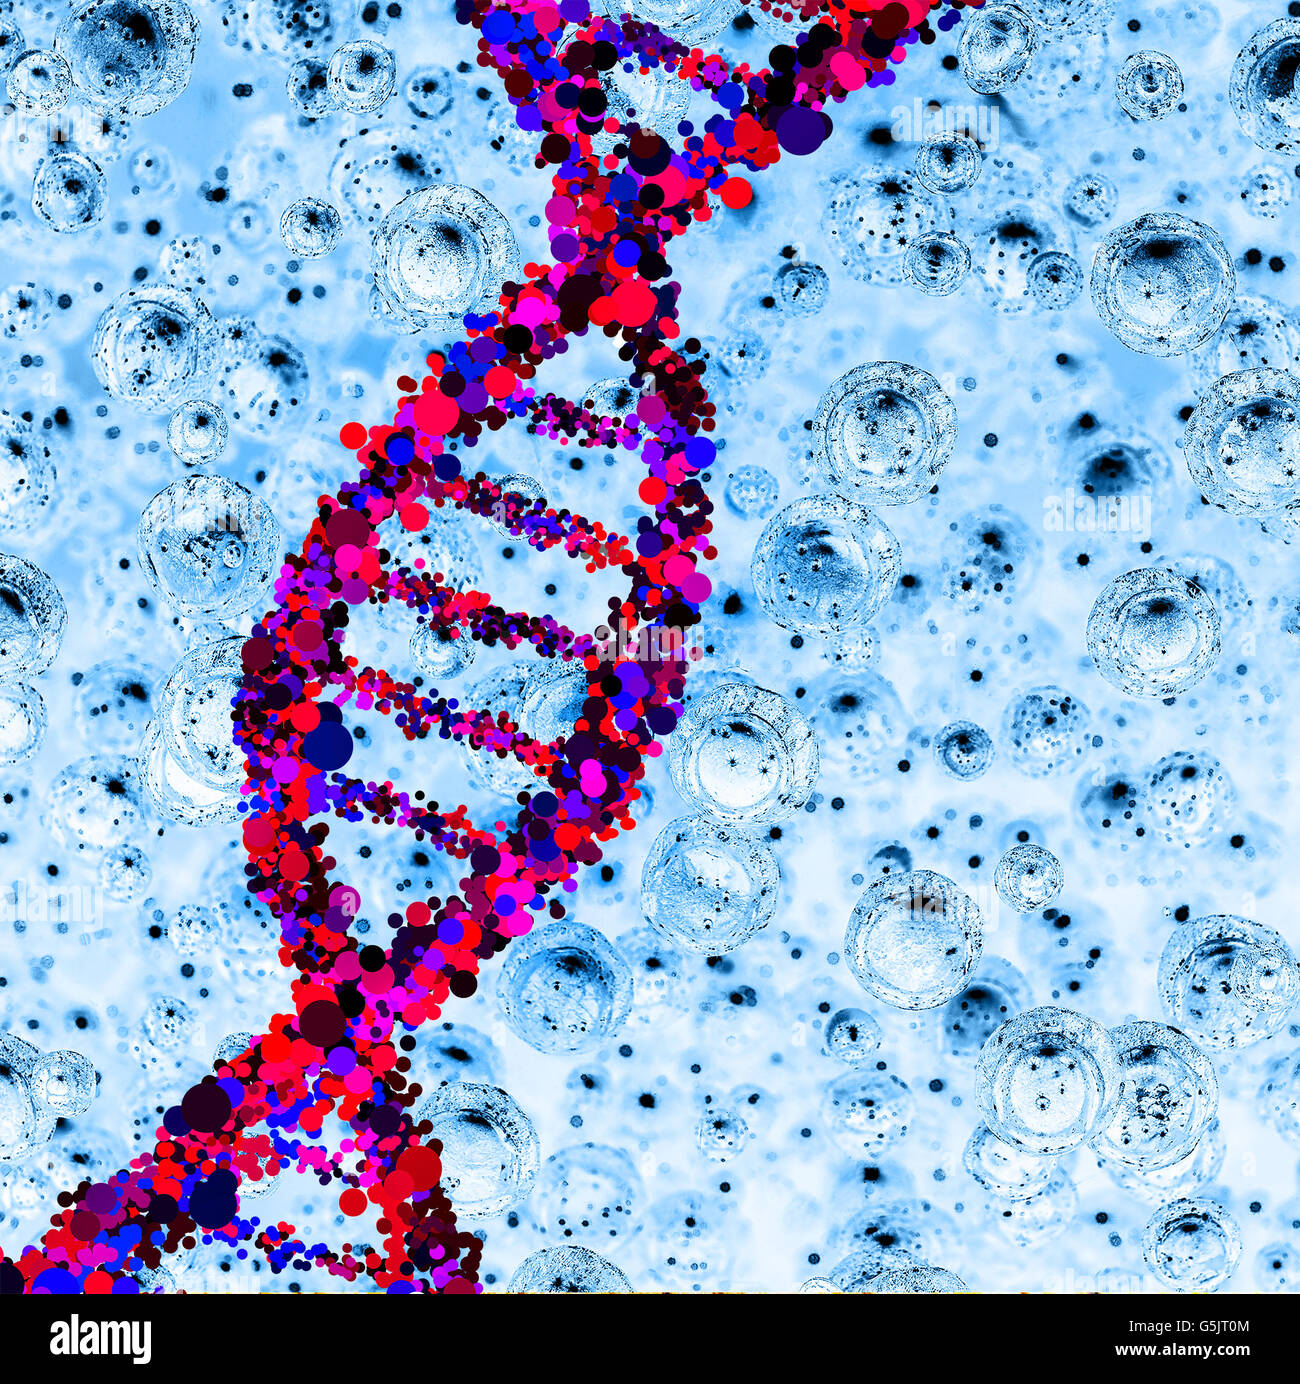 Dna genetic concept with a spiral shape. Stock Photo